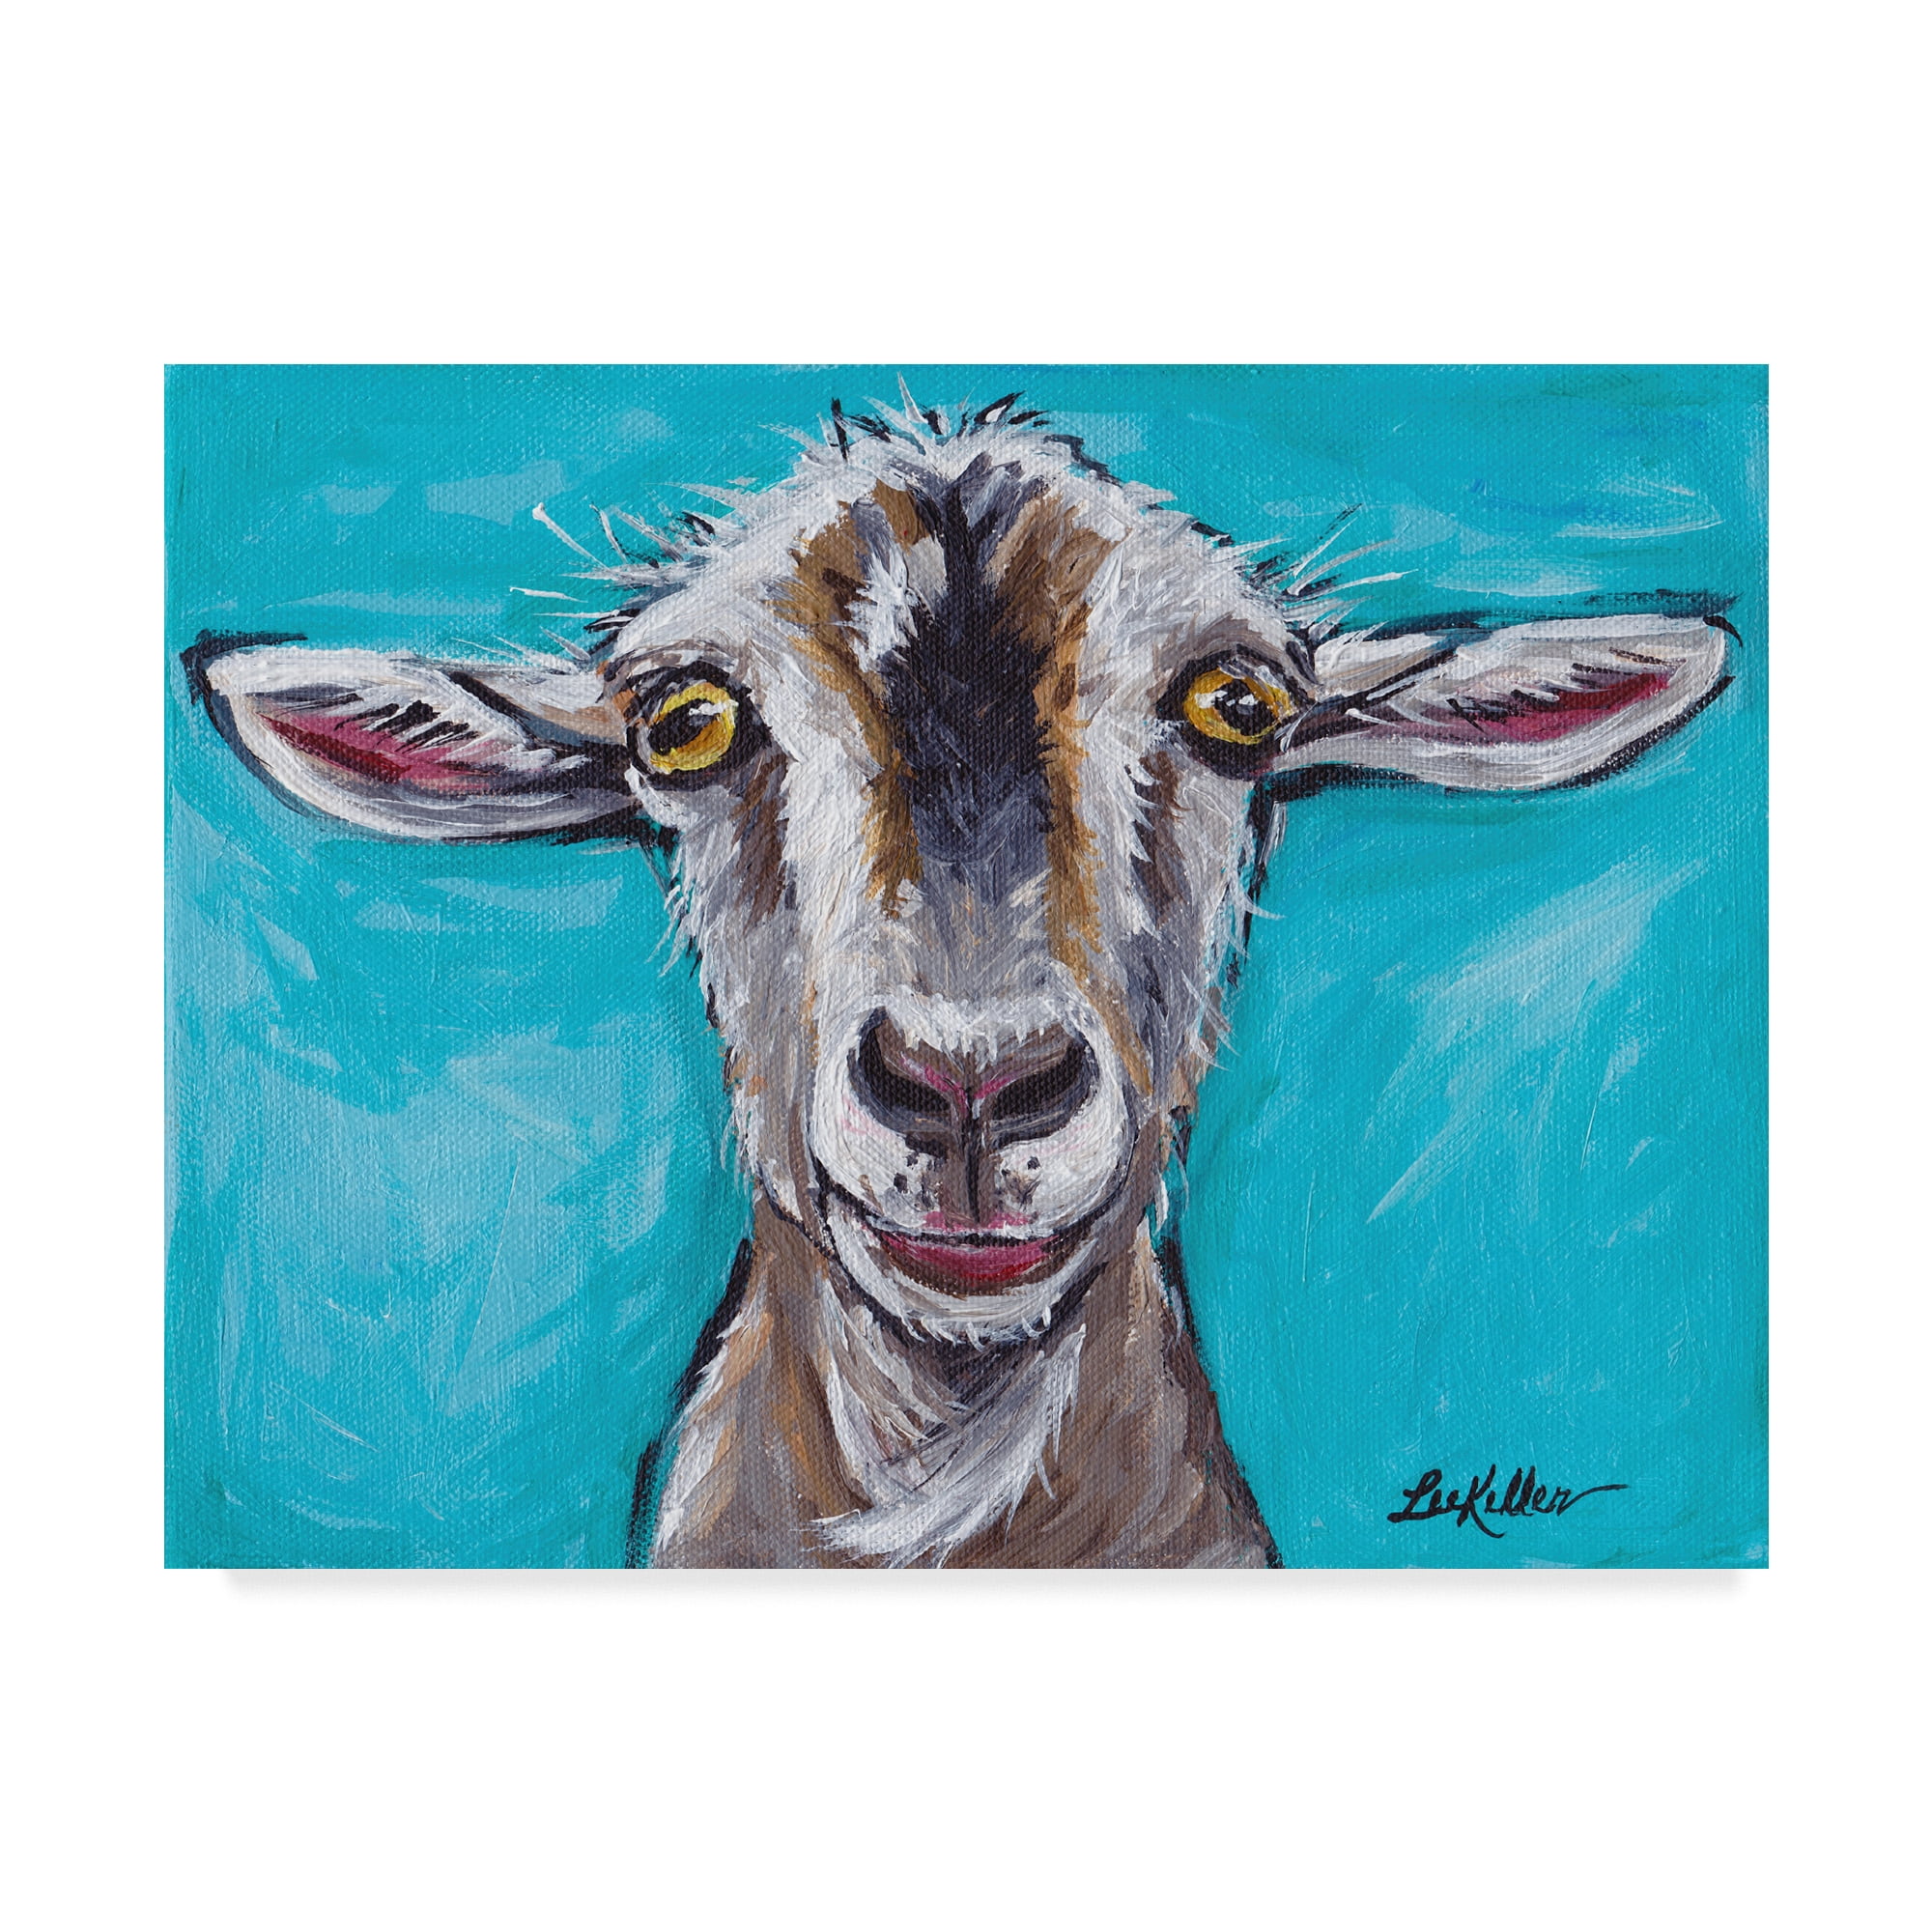 Baby Goat Painting 8 x 10 inches ready to frame Fun Modern Watercolor Print Popular Modern Wall Art Home Decor Trending Nursery Decor Poster Animal Painting